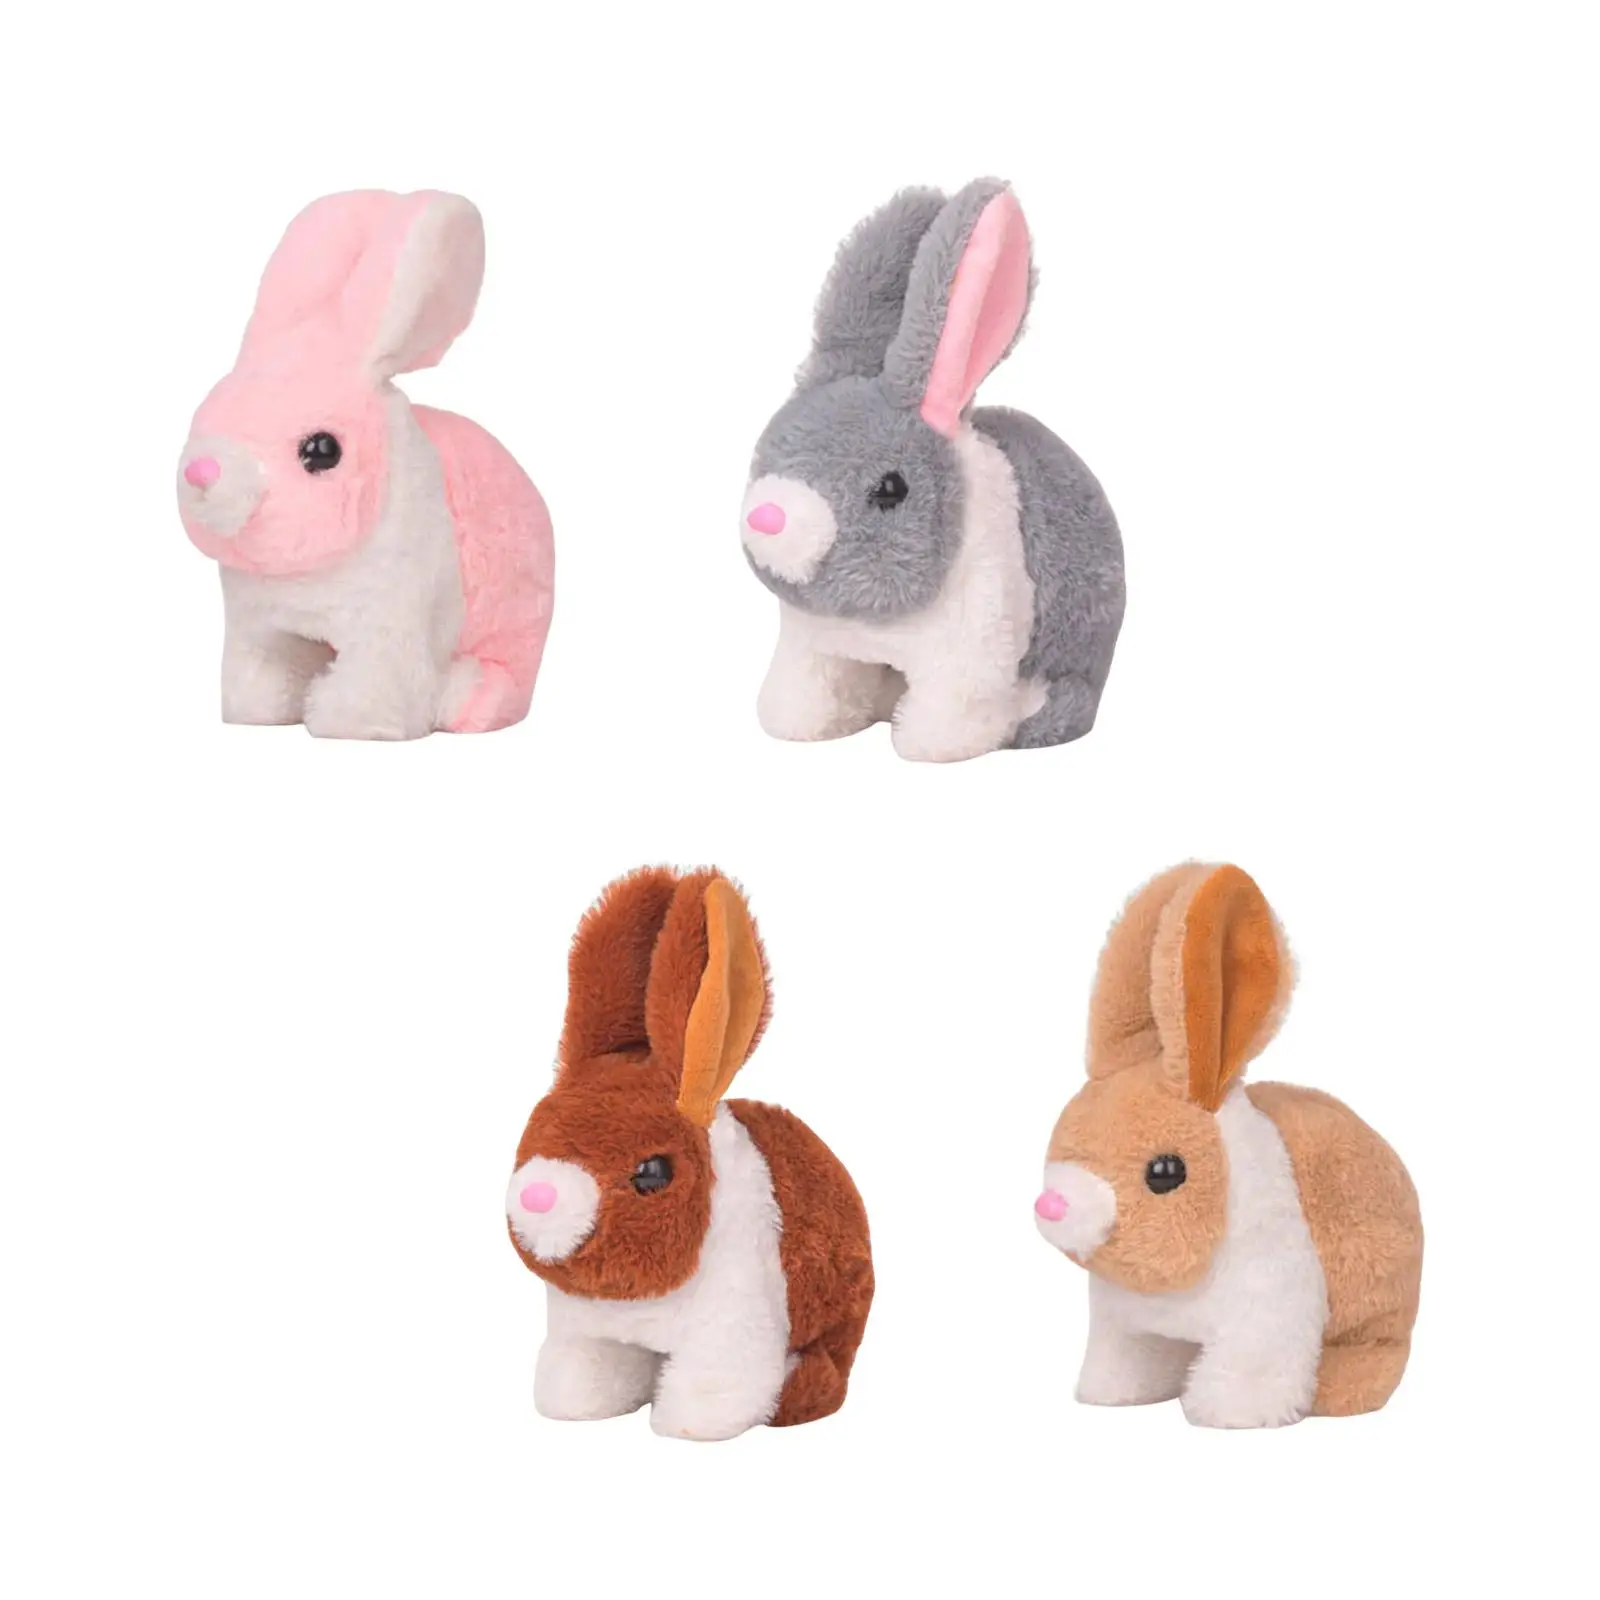 Electric Rabbit Toys Plush Toy, Stuffed Animal Wiggling Ears, Realistic, Early Education for Easter Holiday Kids Toy